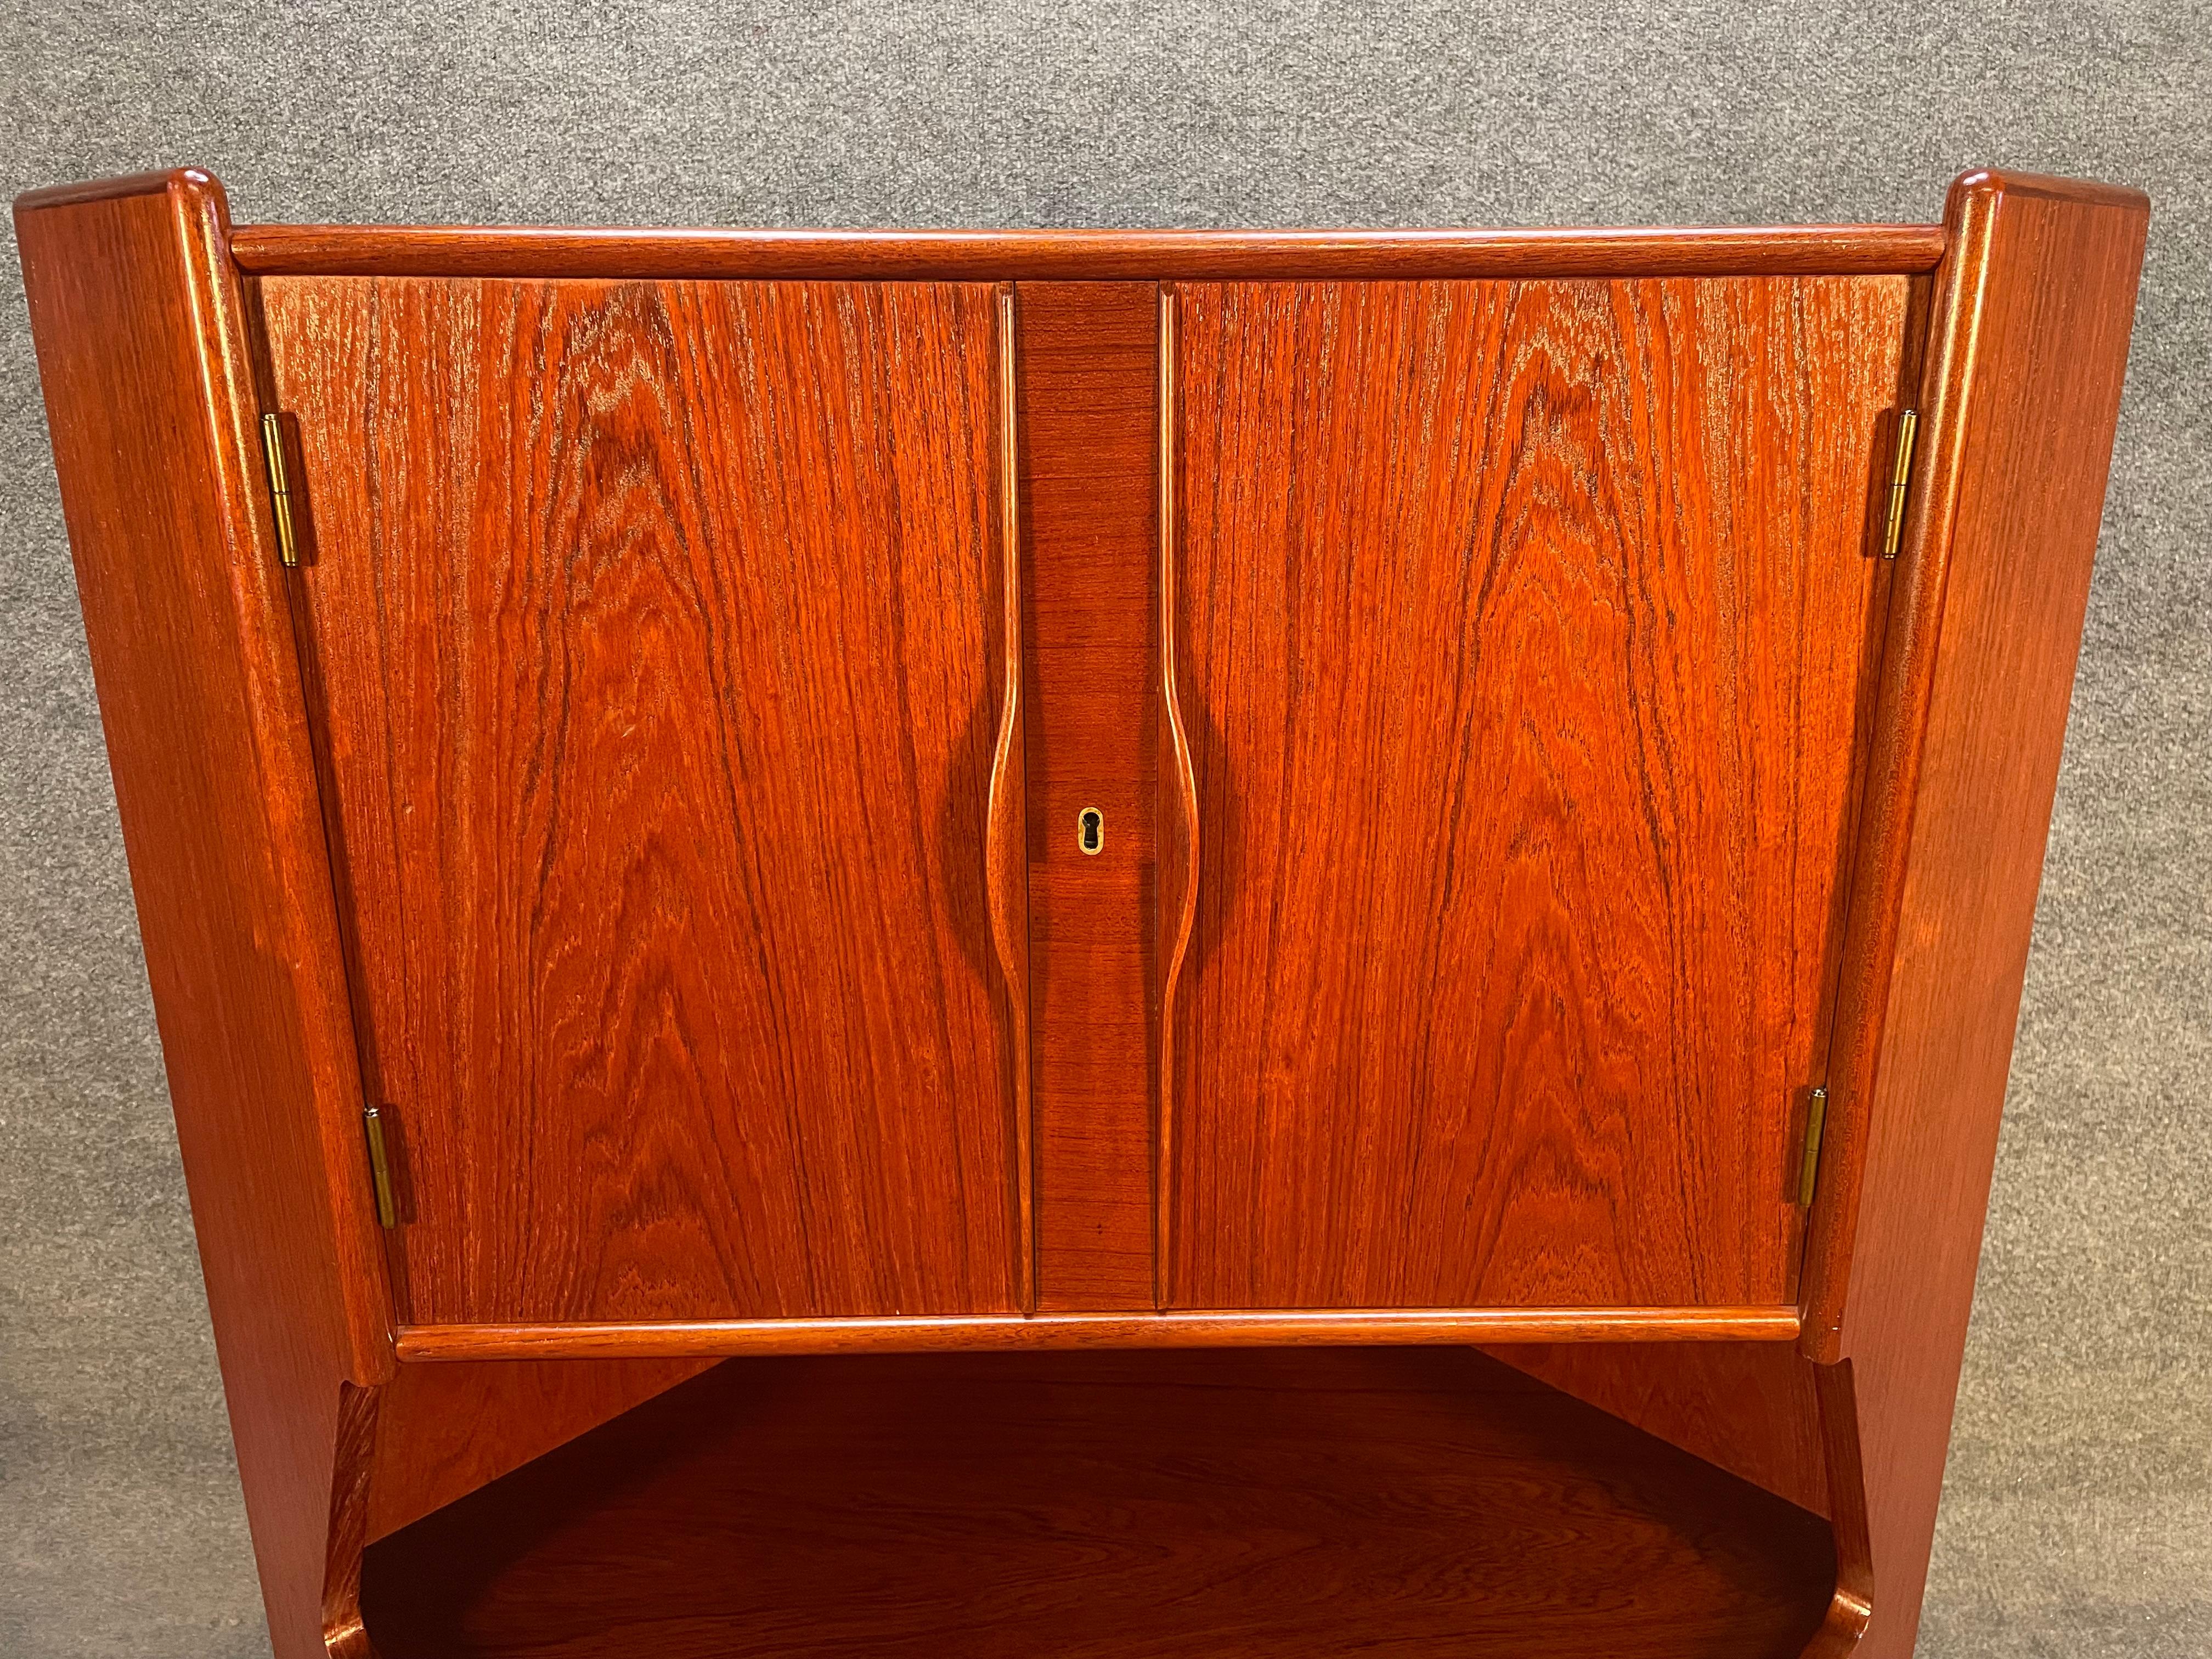 Here is a beautiful 1960's scandinavian modern teak corner cabinet recently imported from Denmark to California before its refinishing.
This lovely piece features a vibrant wood grain, a dry bar with shelving and etched mirror, three drawers and